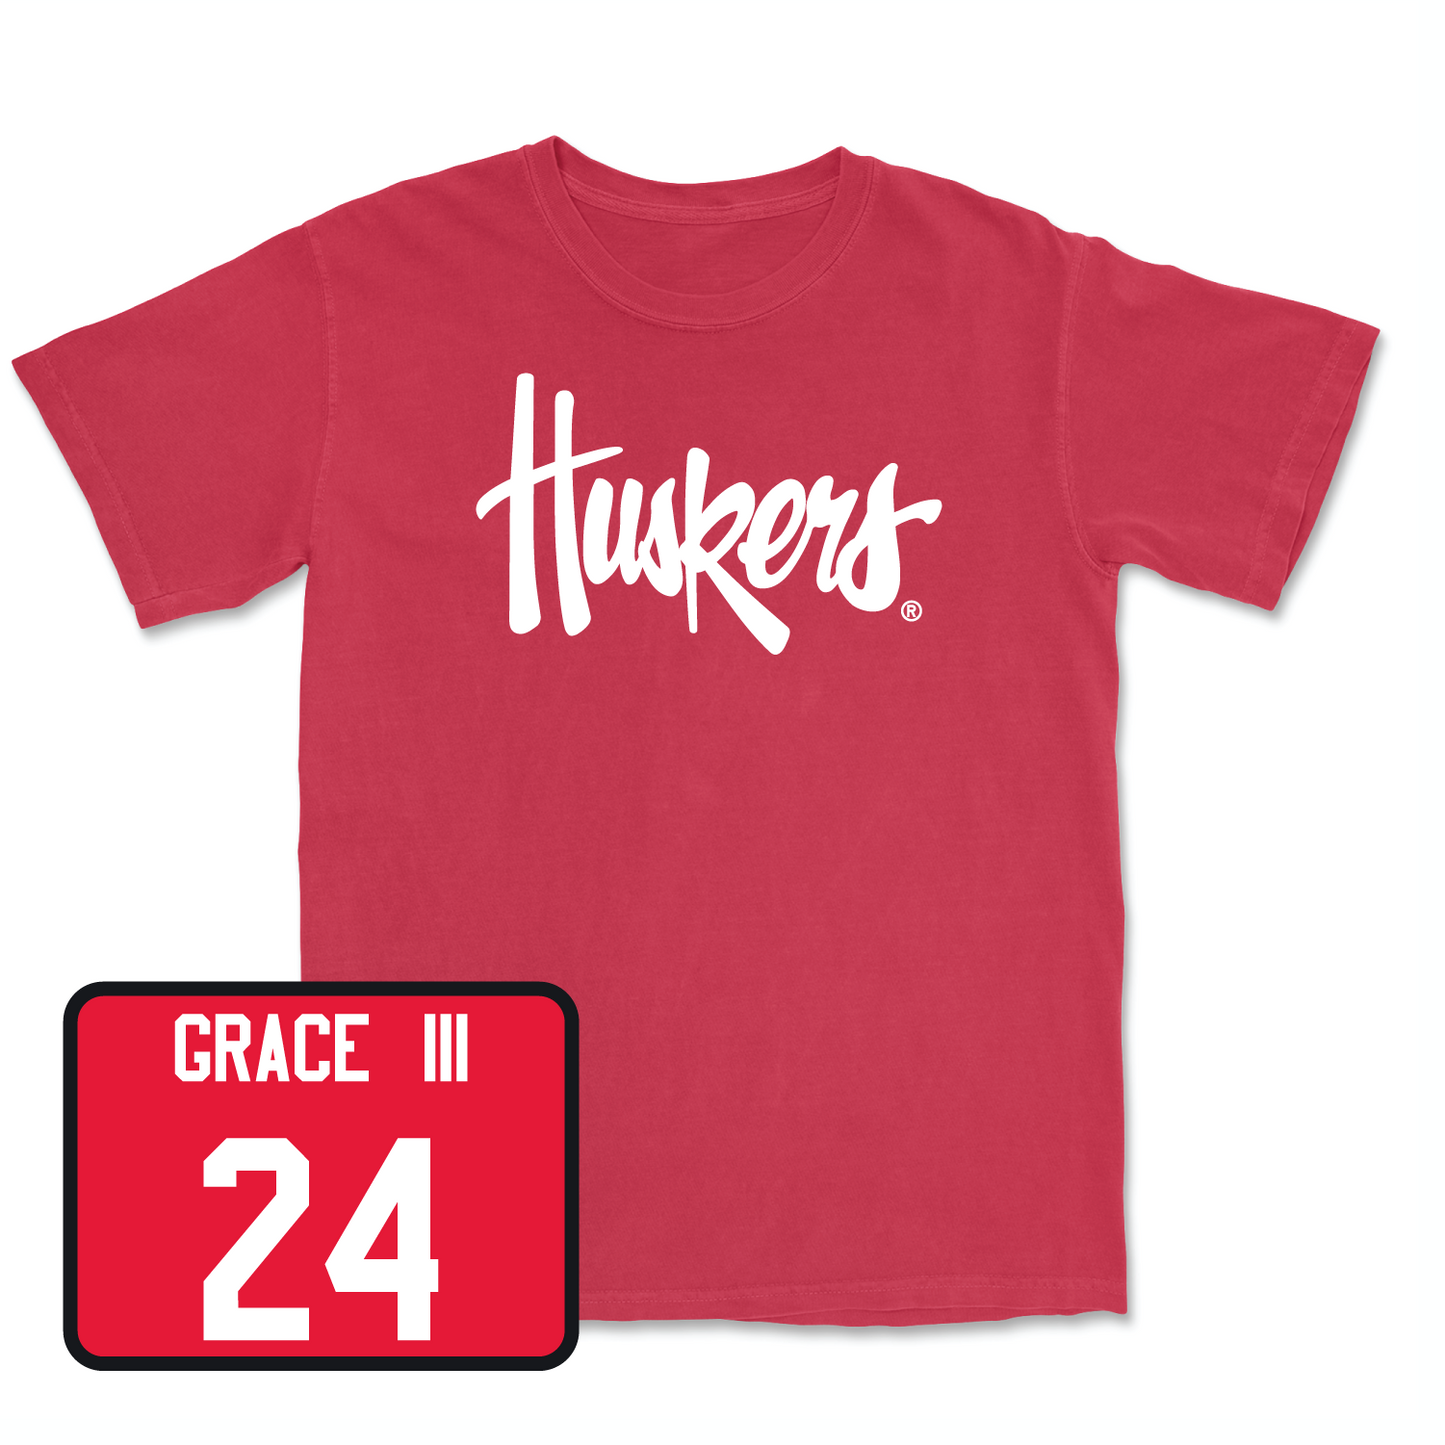 Red Men's Basketball Huskers Tee Youth Large / Jeffrey Grace III | #24